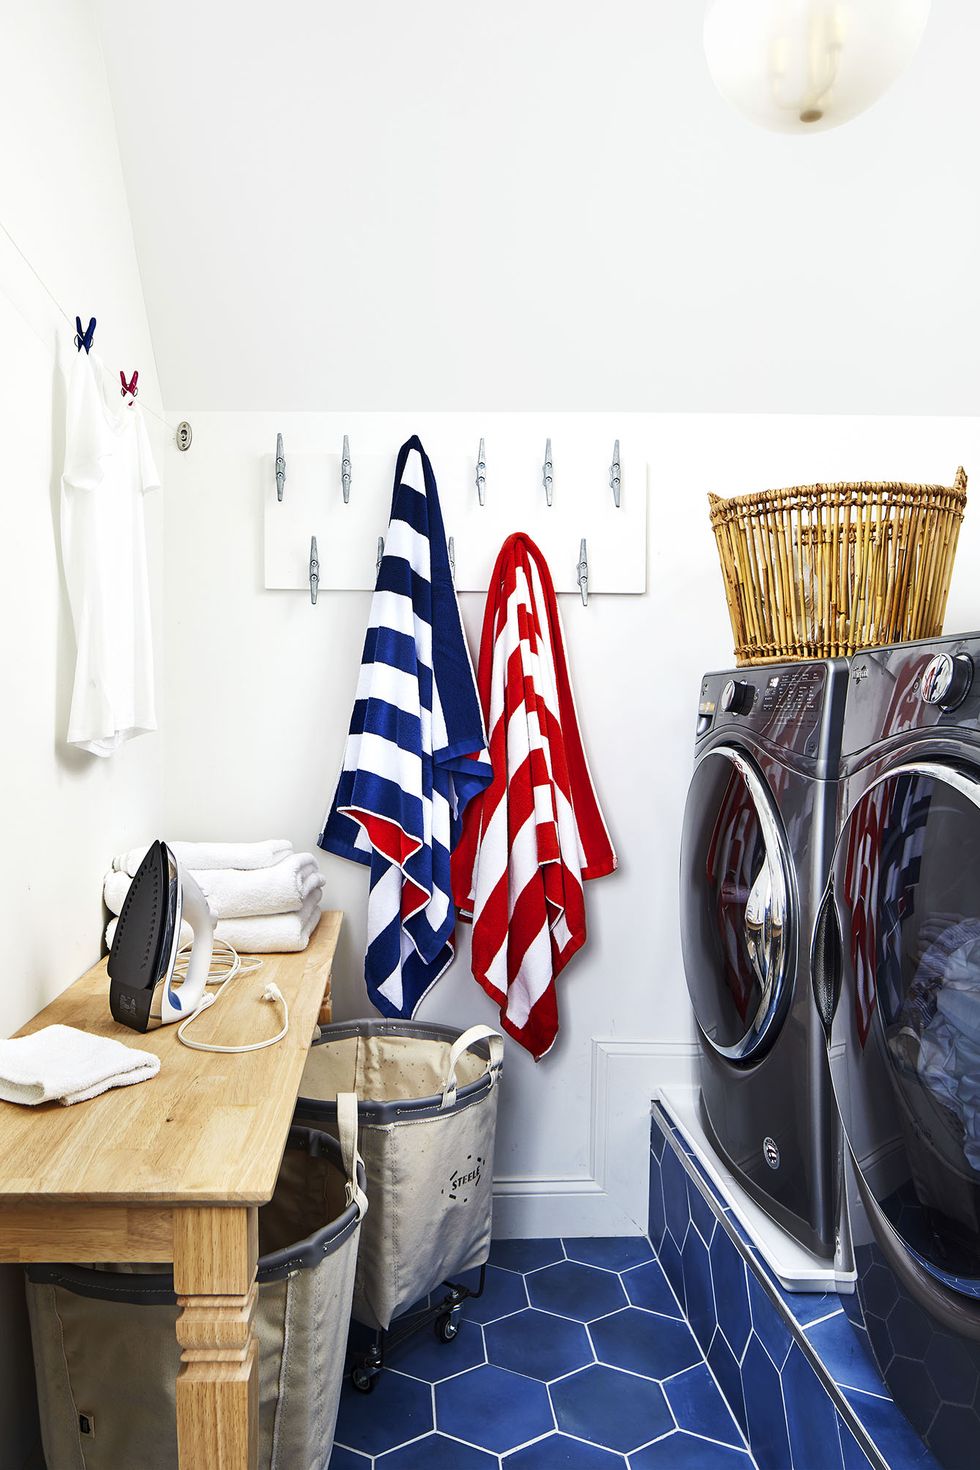 Small Laundry Room Storage Ideas - drying rack solutions